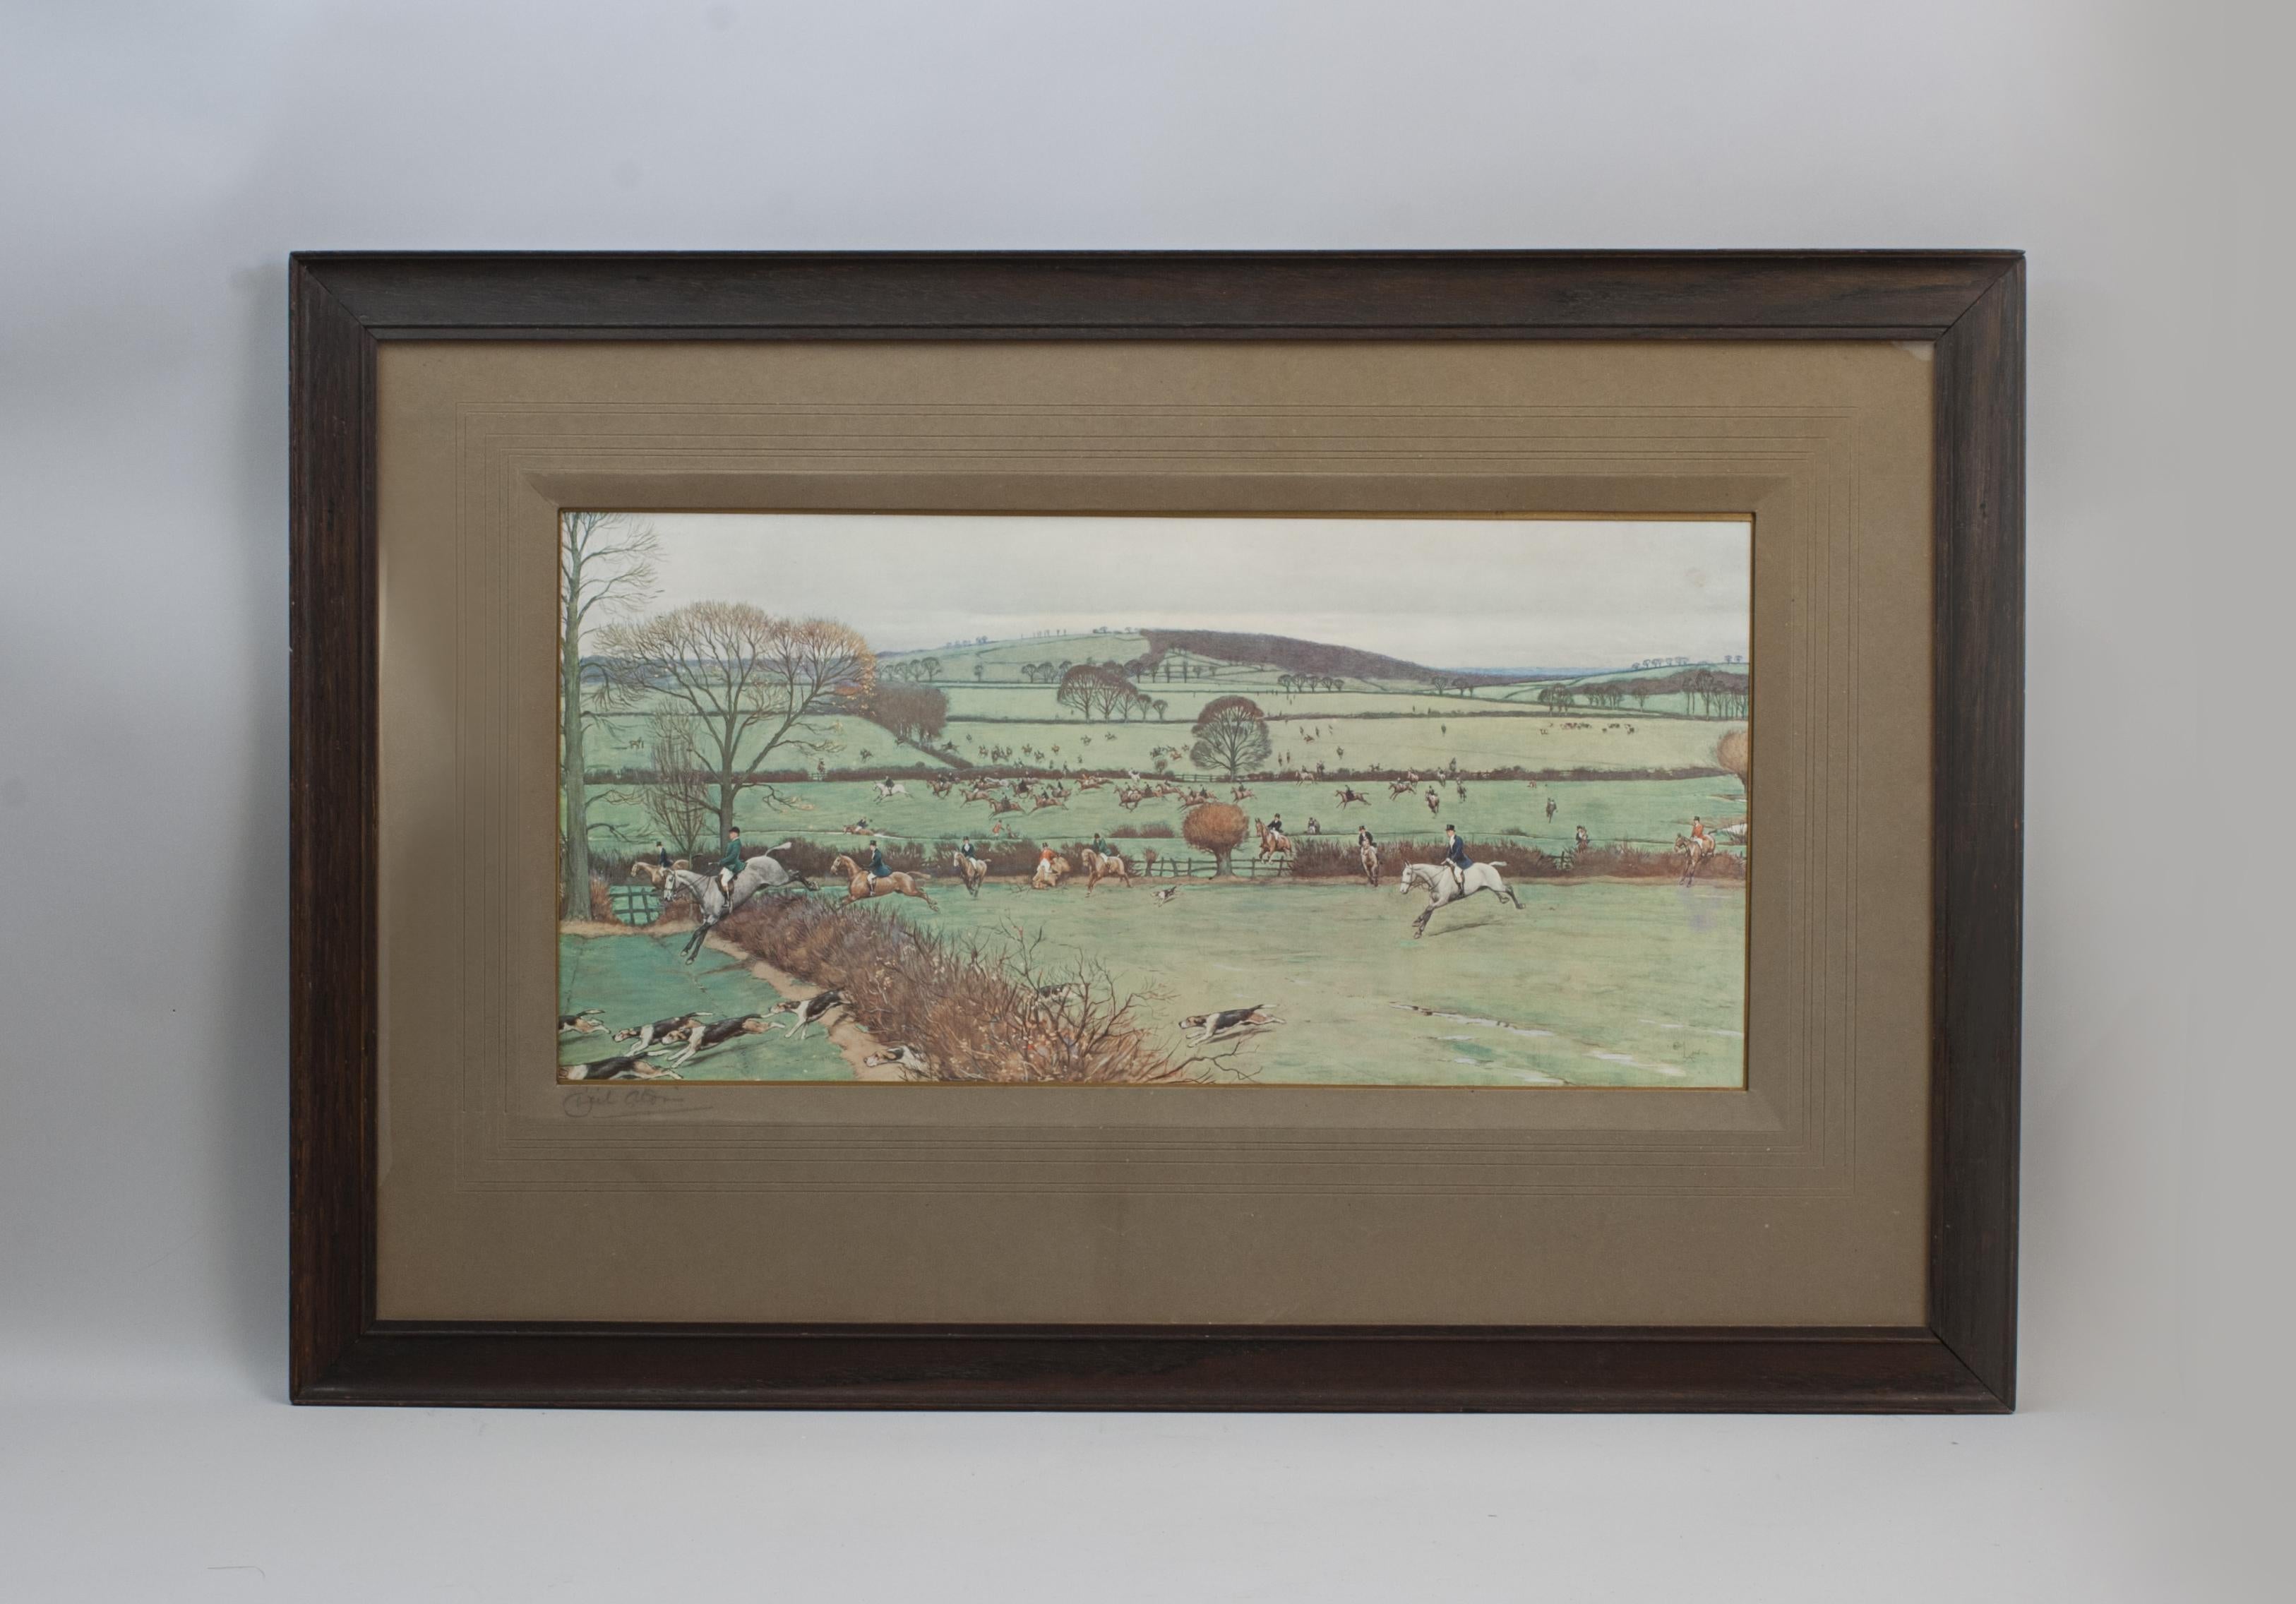 Hunting Countries Of England by Cecil Aldin, The Duke of Beaufort's Hunt.
A single signed limited edition print, mounted and framed 